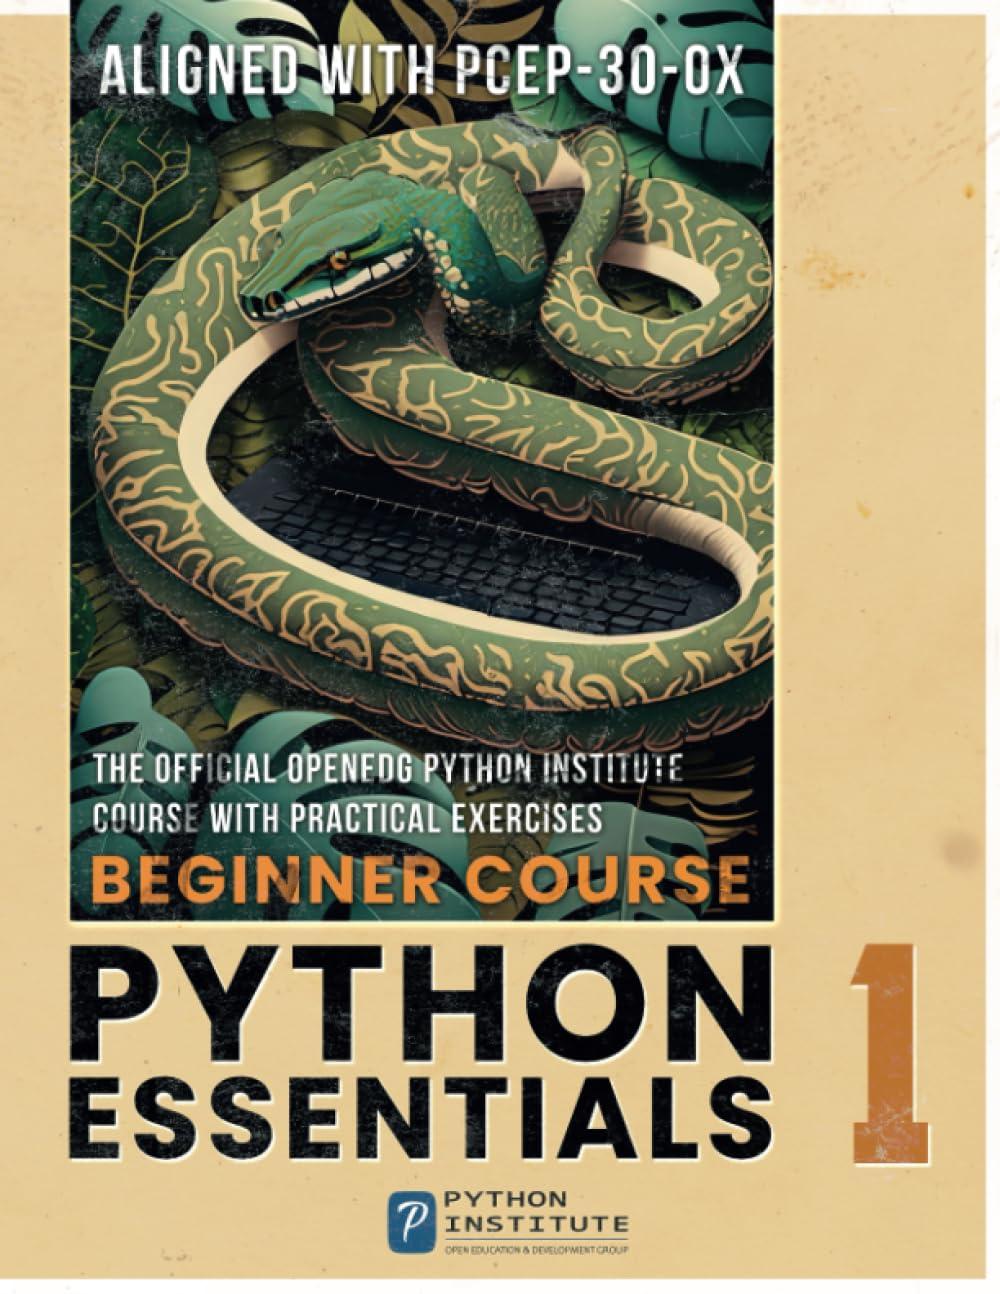 python essentials 1 aligned with pcep 30 0x 1st edition the openedg python institute b0c1jctct8,